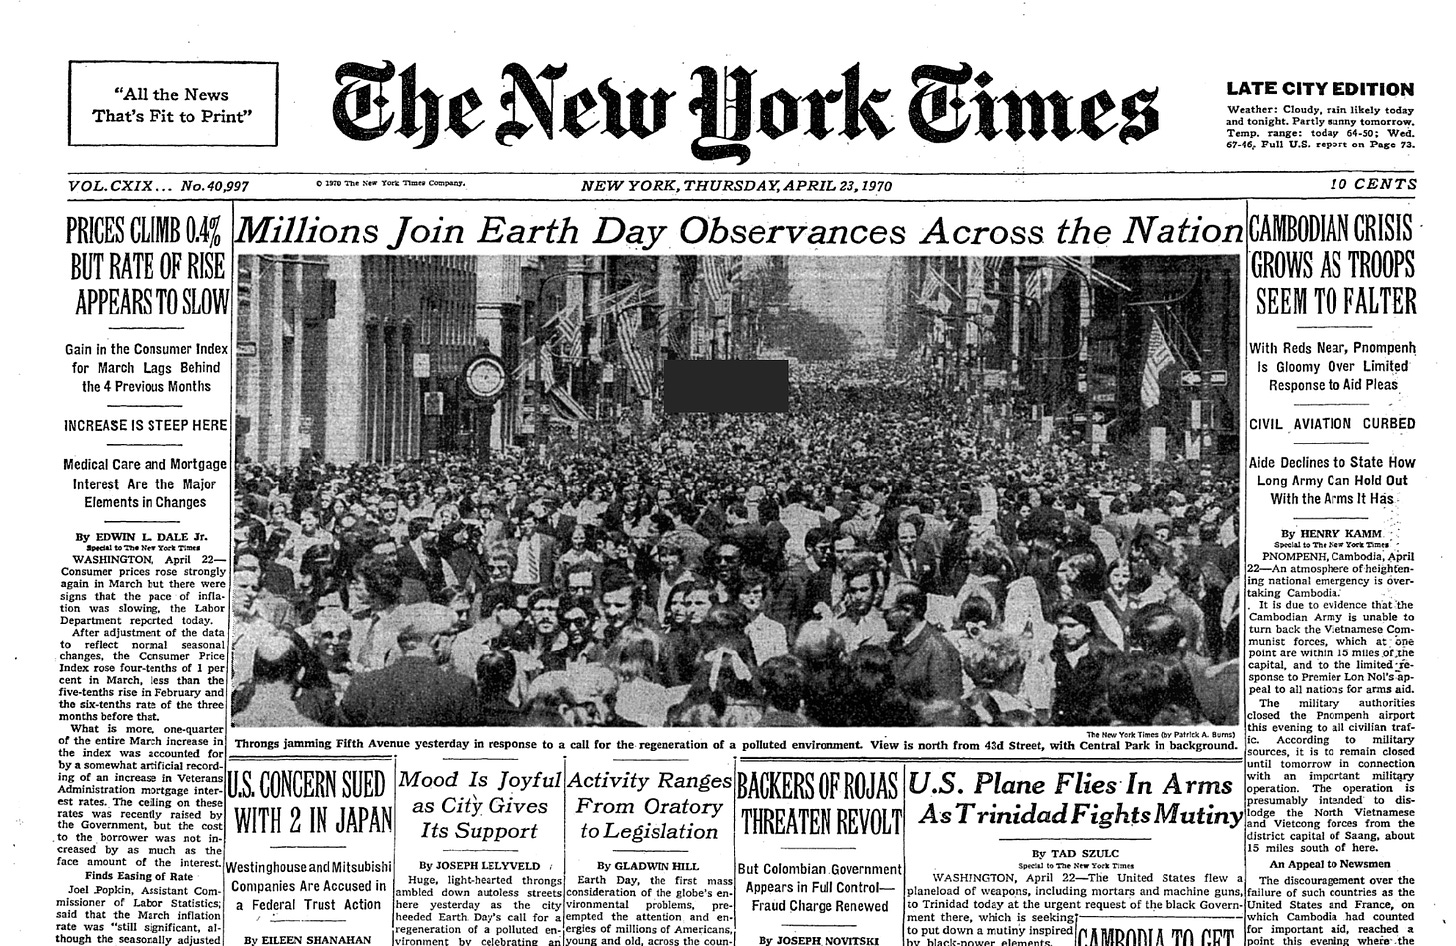 New York Times front page (April 23, 1970): "Millions Join Earth Day Observances Across the Nation."